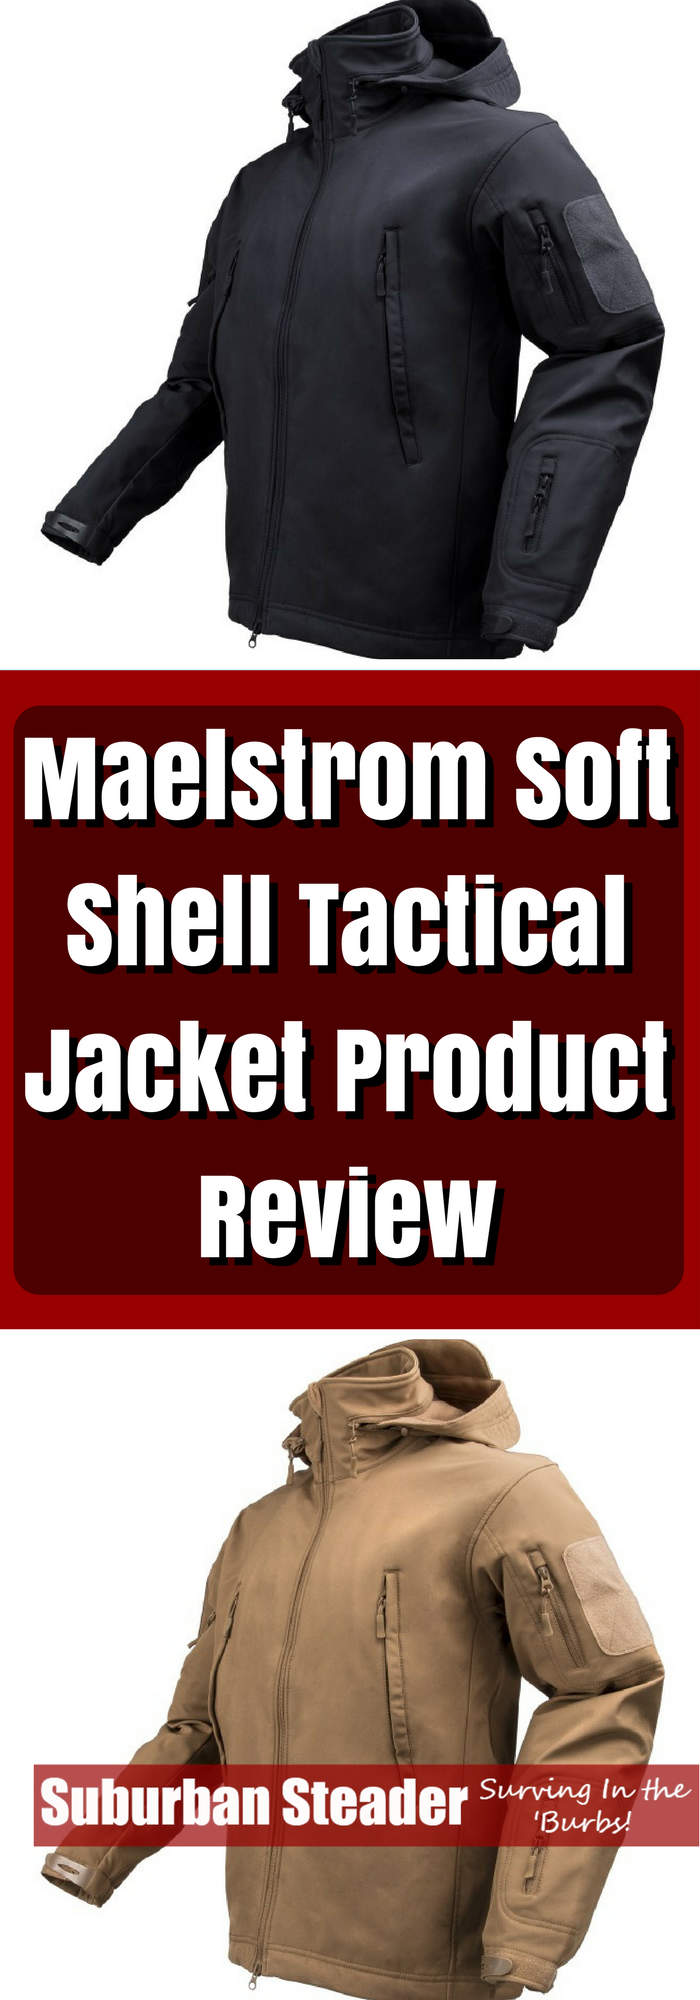 Maelstrom Soft Shell Jacket Product Review